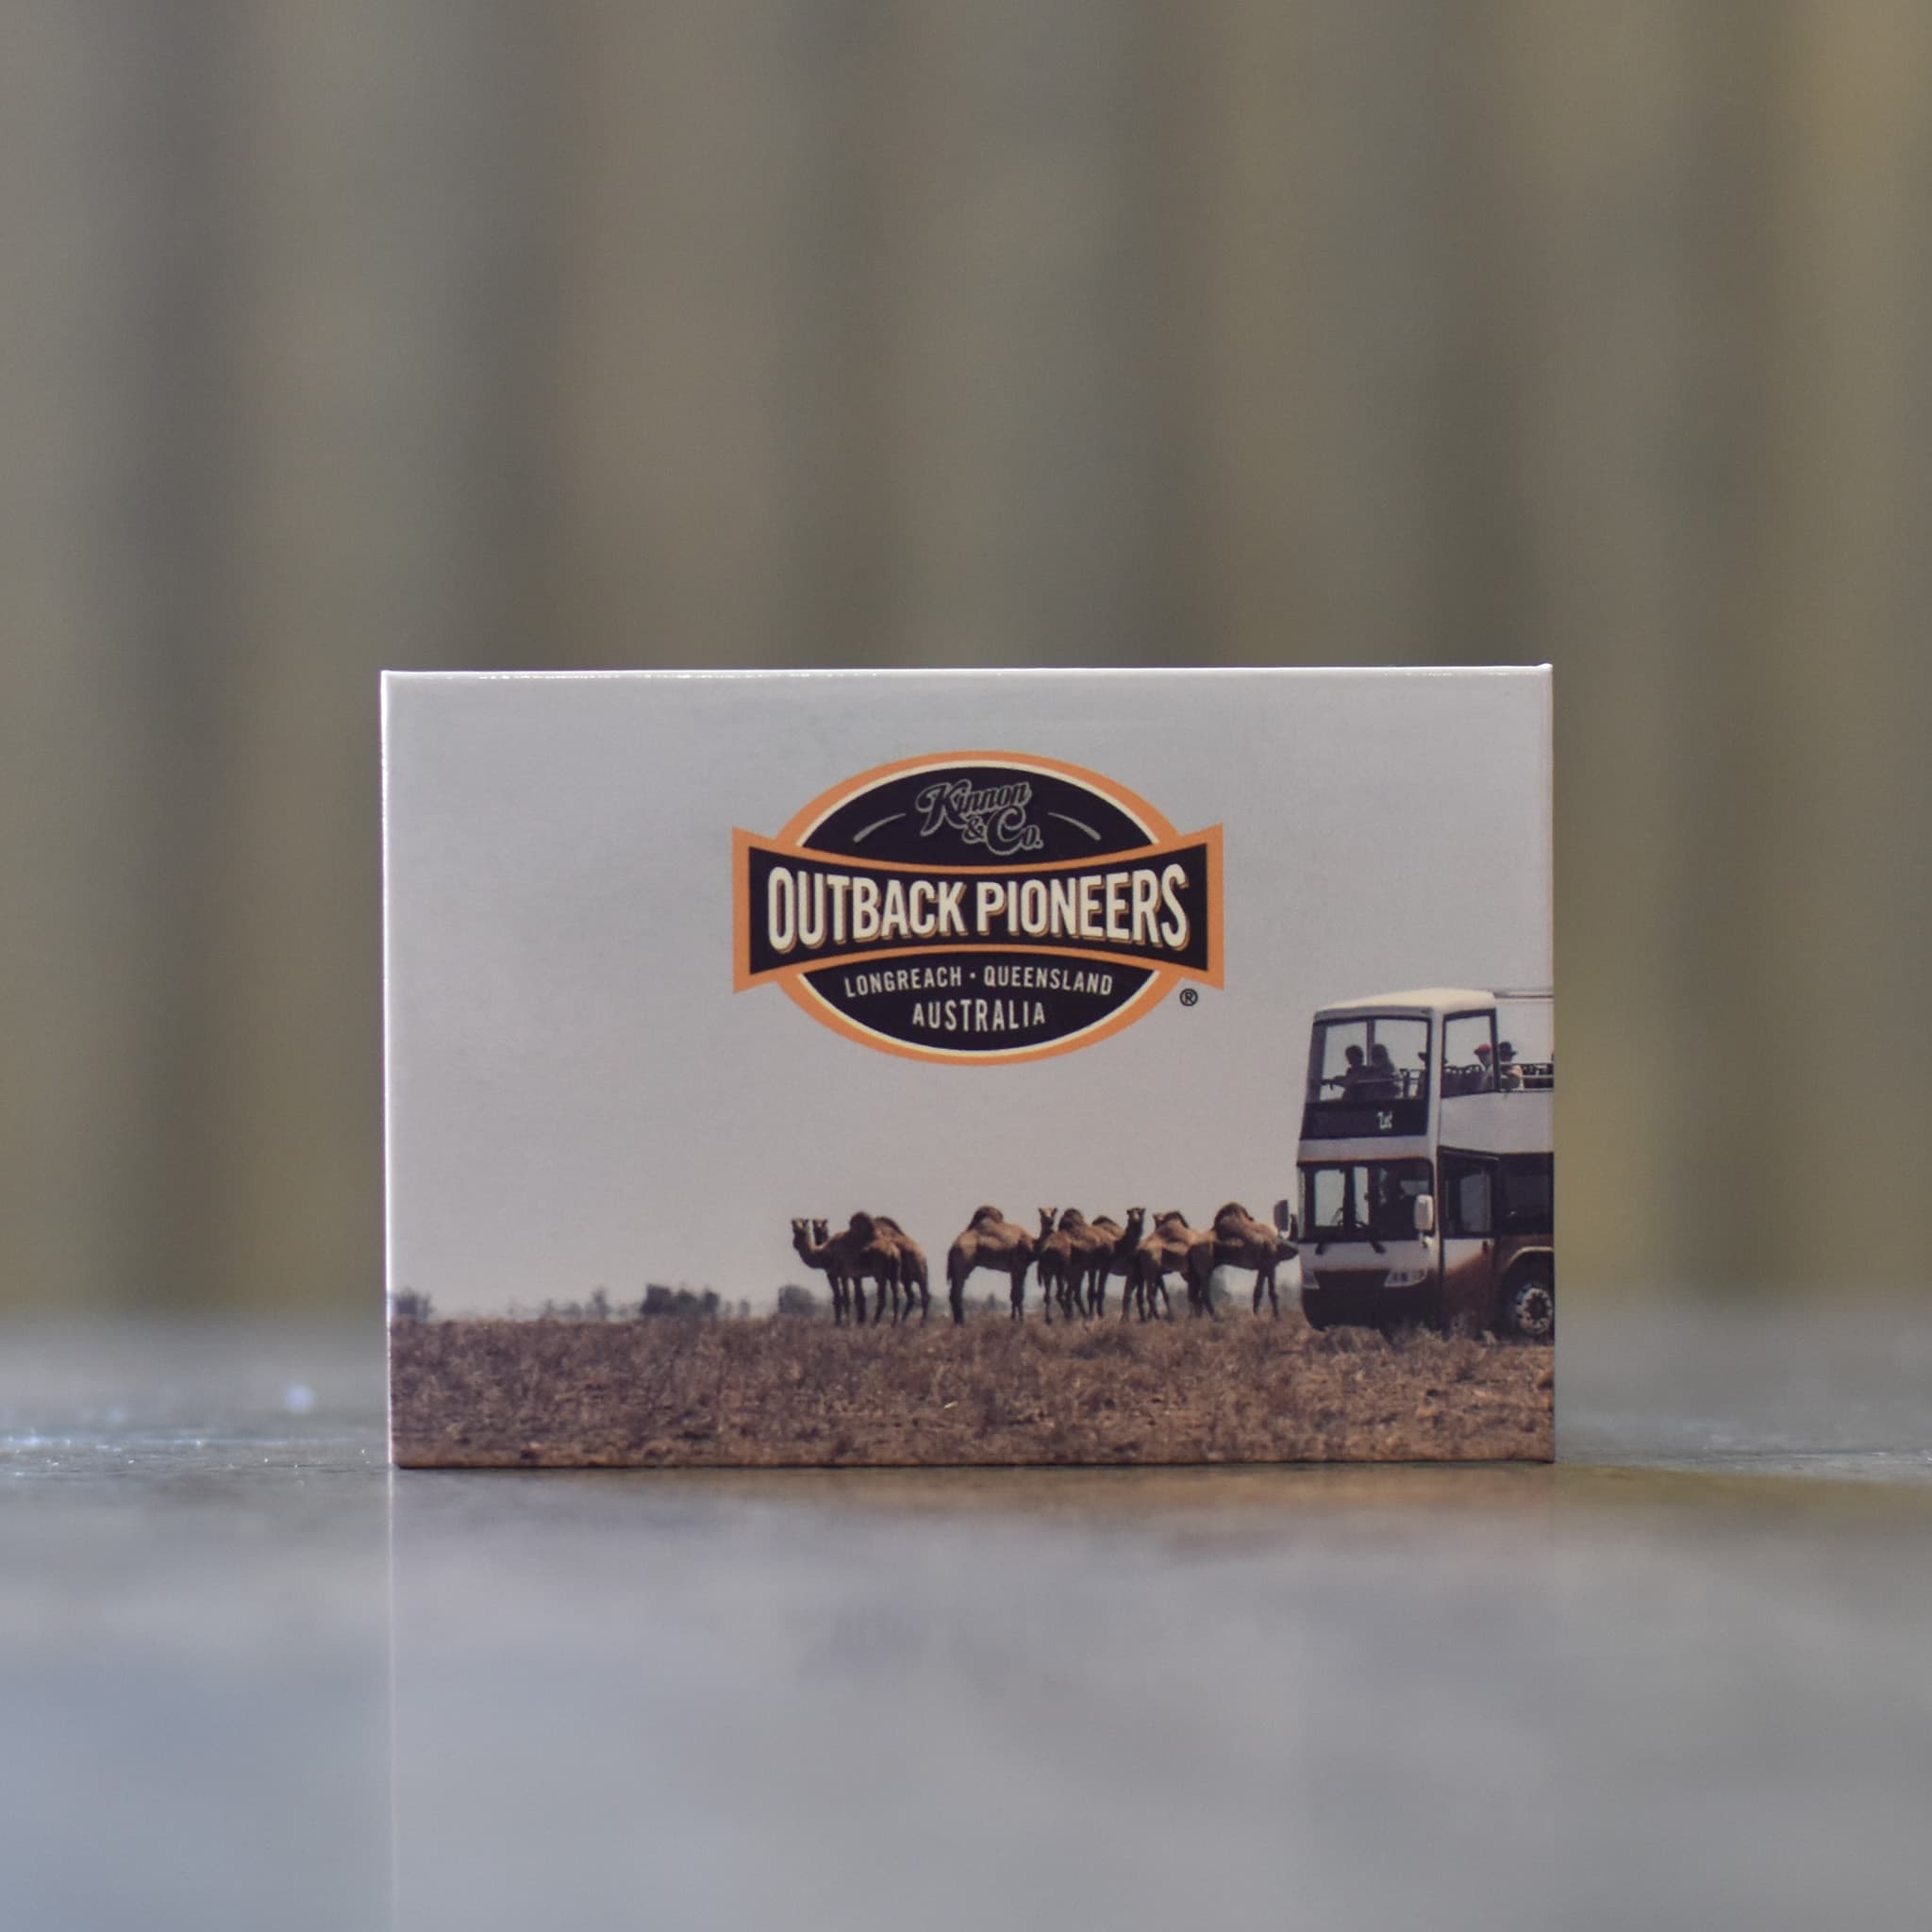 Outback Pioneers Magnet, Nogo Station, Camels and safari bus.